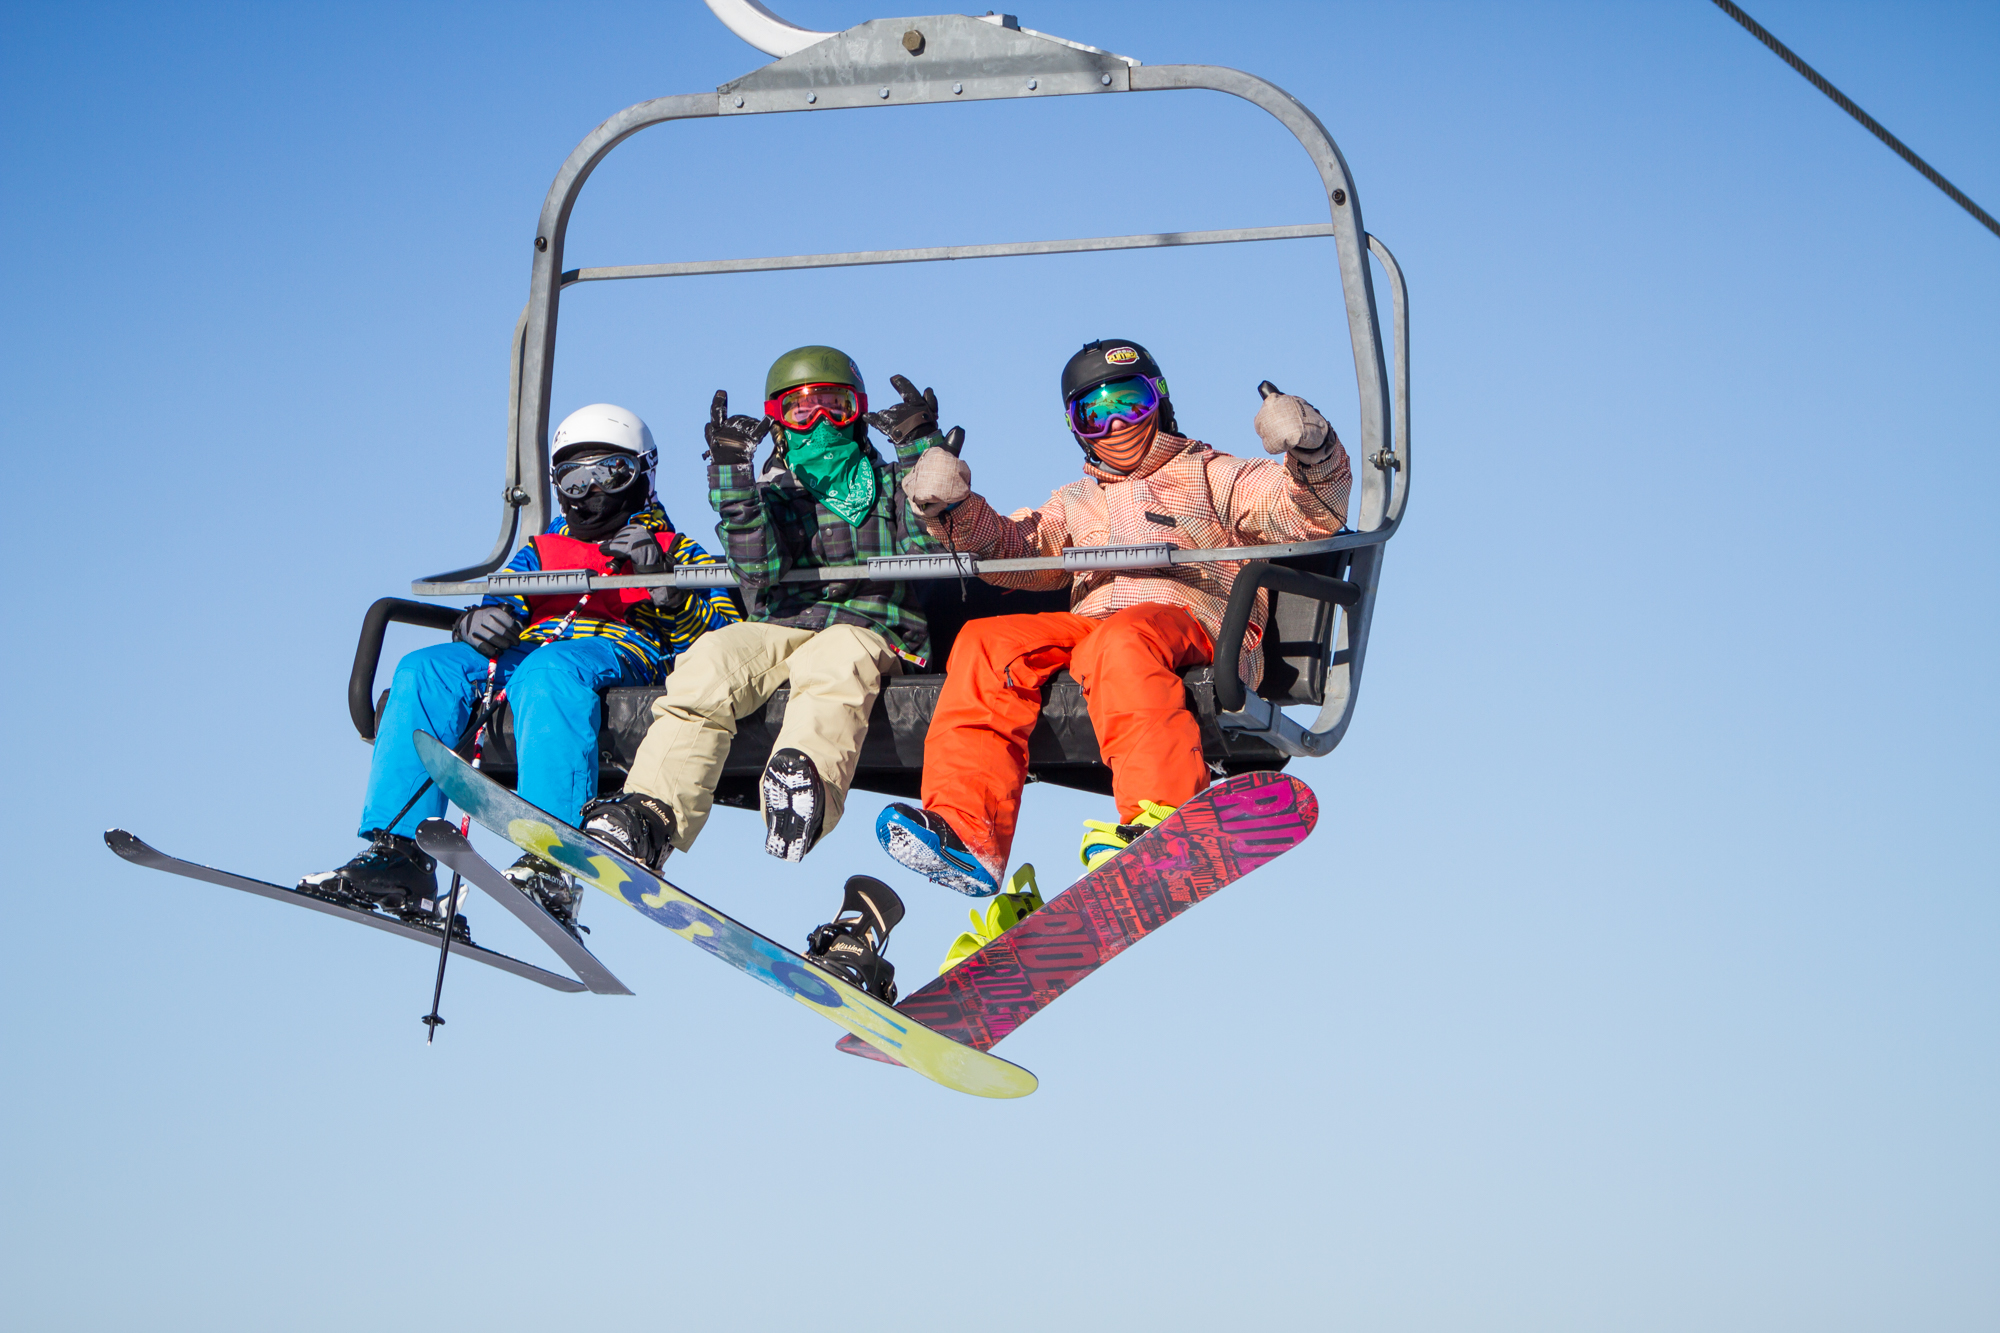 Lift Tickets And Rental Options At Horseshoe Resort Barrie On in The Most Awesome along with Beautiful ski and snowboard show barrie with regard to Your own home